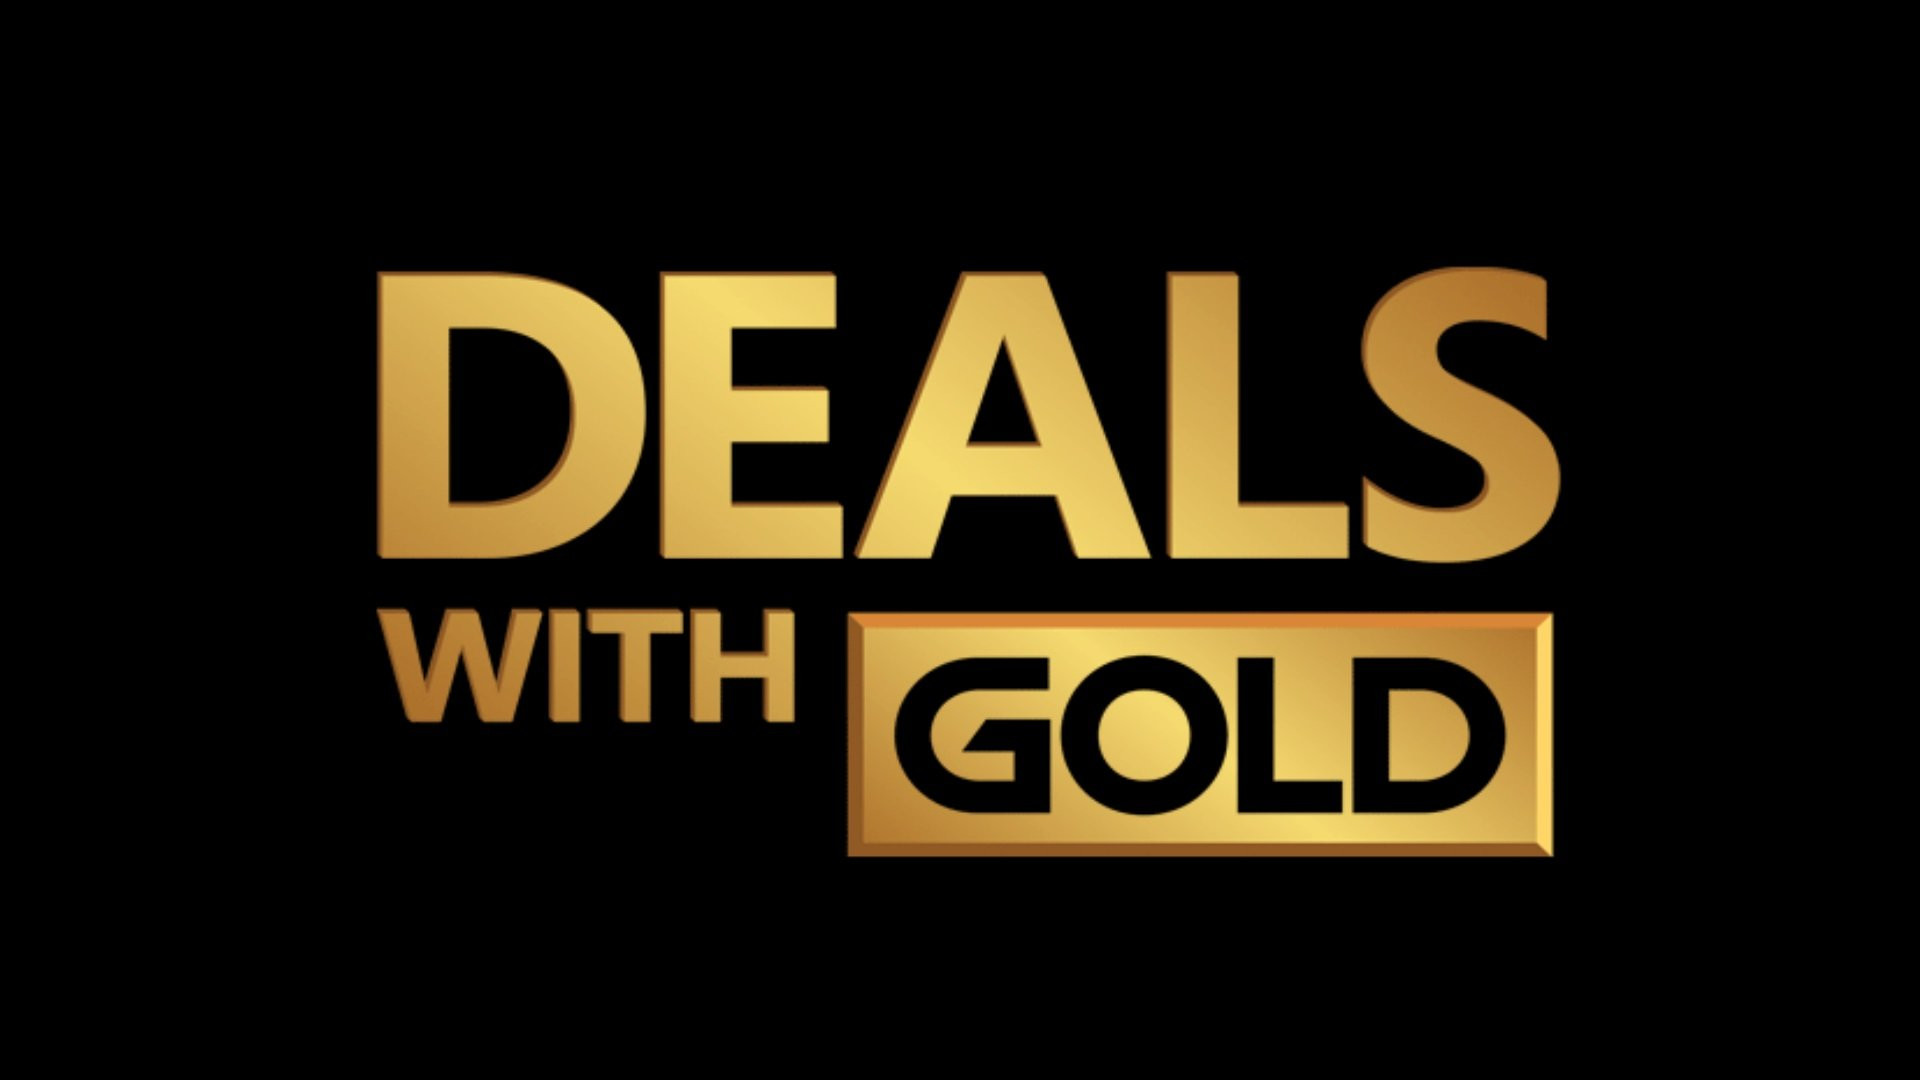 Deals with Gold semaine 6